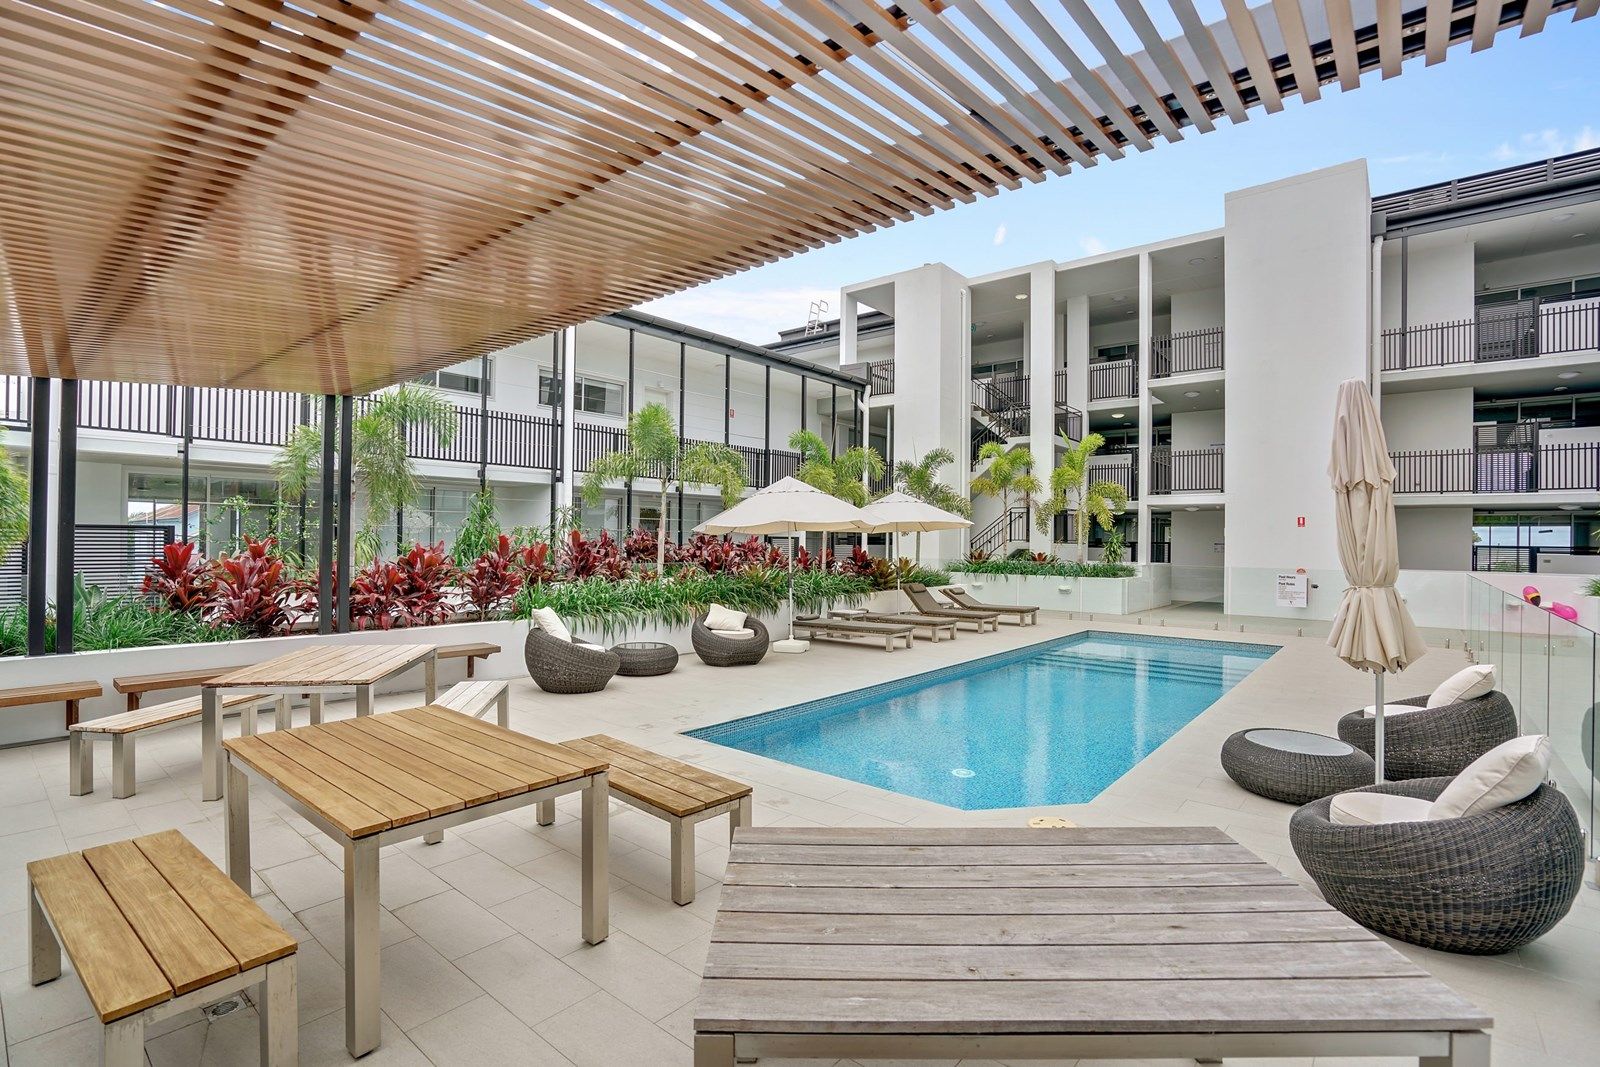 Point View Residences Poolside Area